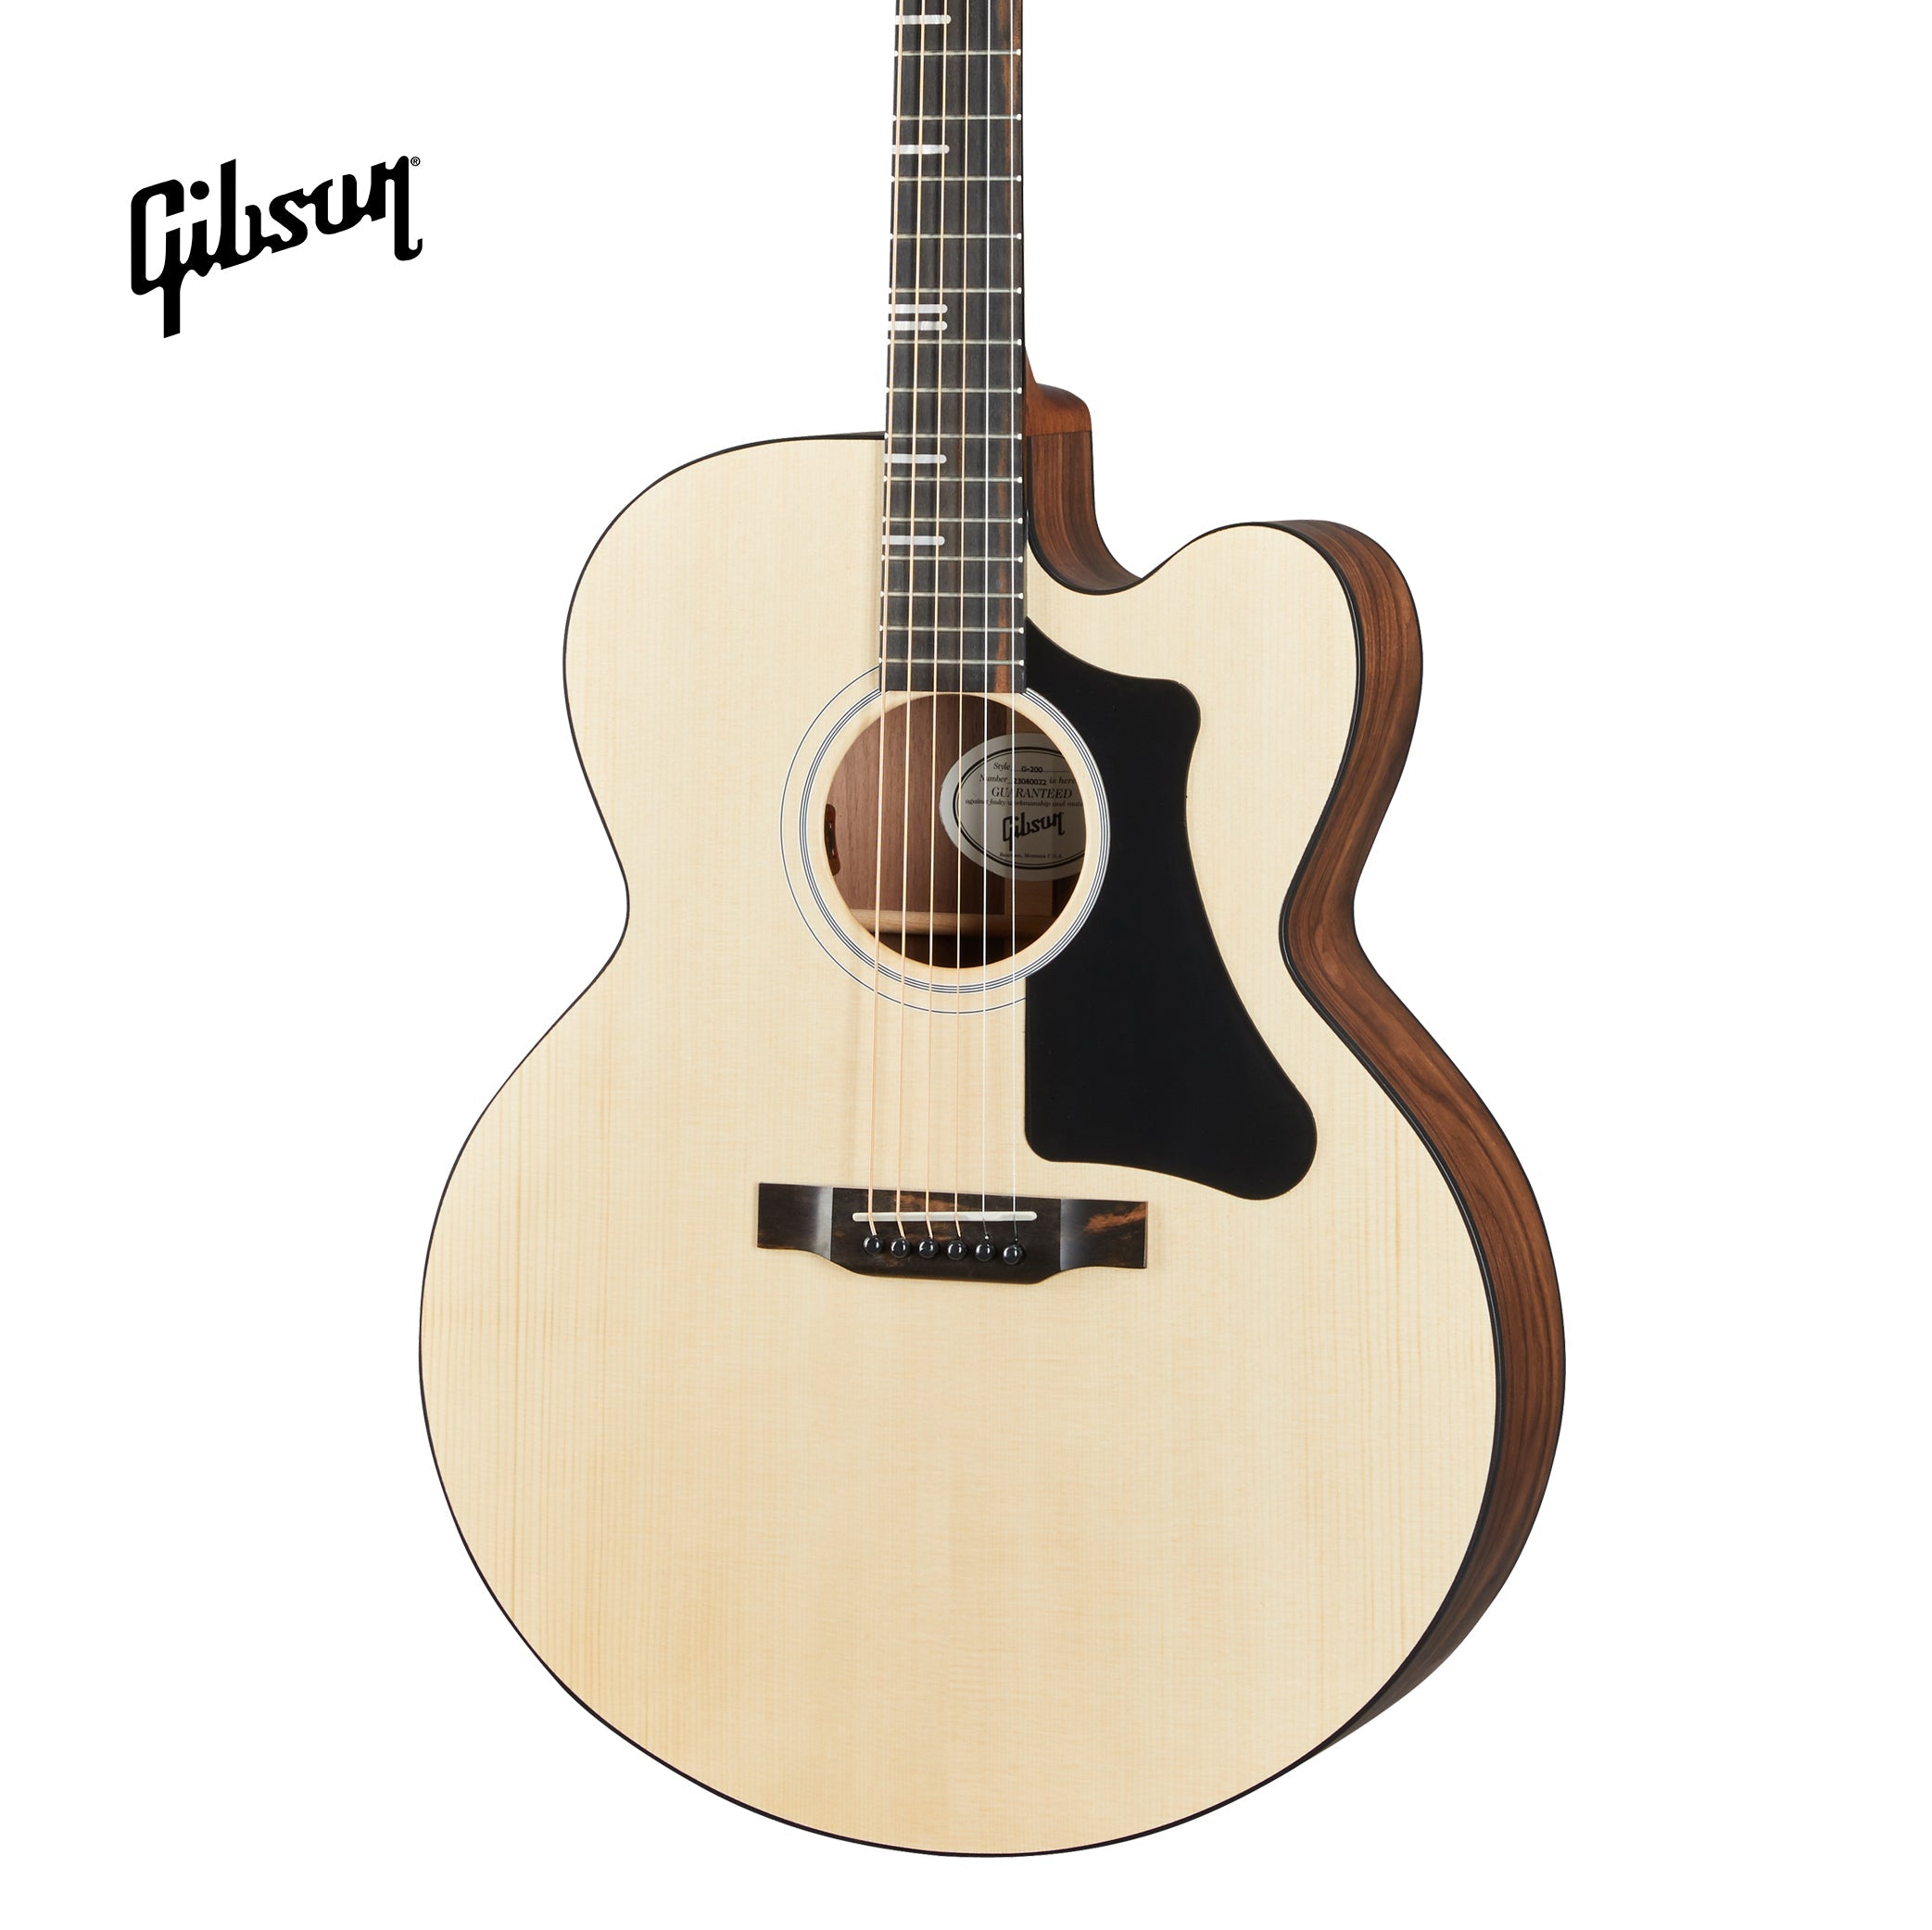 GIBSON G-200 EC ACOUSTIC-ELECTRIC GUITAR - NATURAL